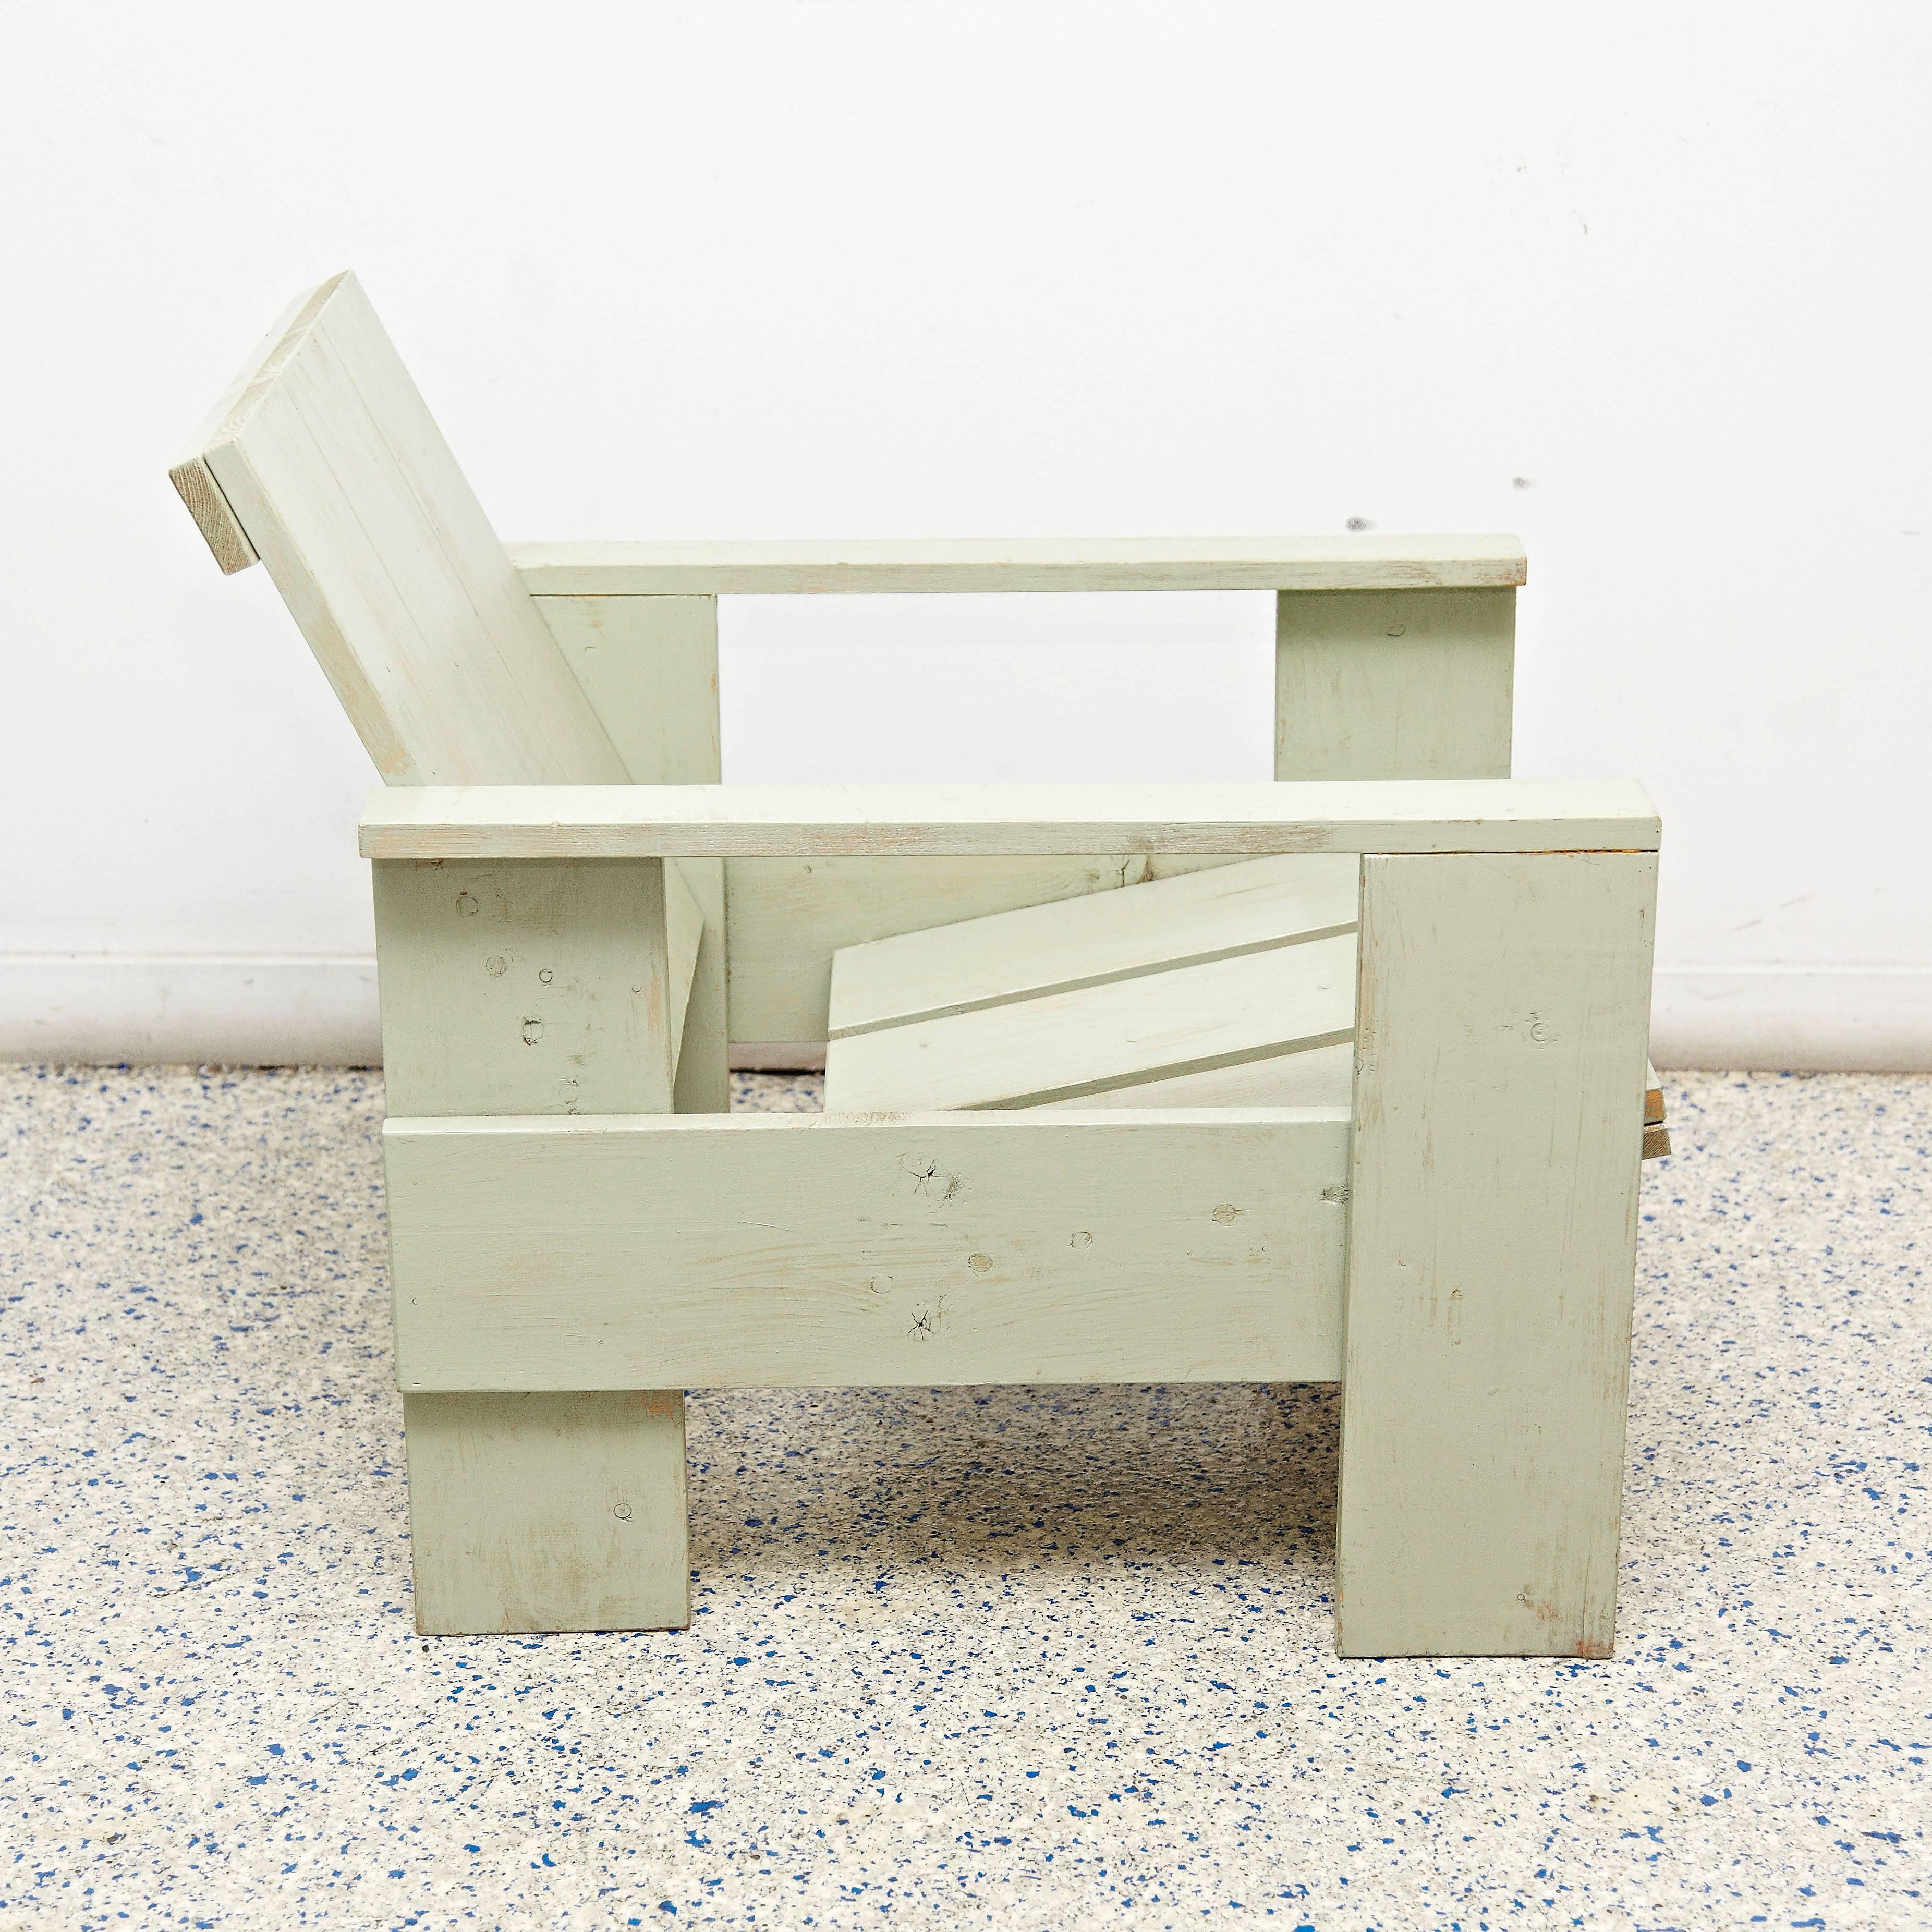 Crate chair designed by Gerrit Thomas Rietveld, executed around 1950 by unknown manufacurer in Holland.

Lacquered wood.

In good original condition, preserving a beautifull patina.

Gerrit Thomas Rietveld ( 24 June 1888–25 June 1964) was a